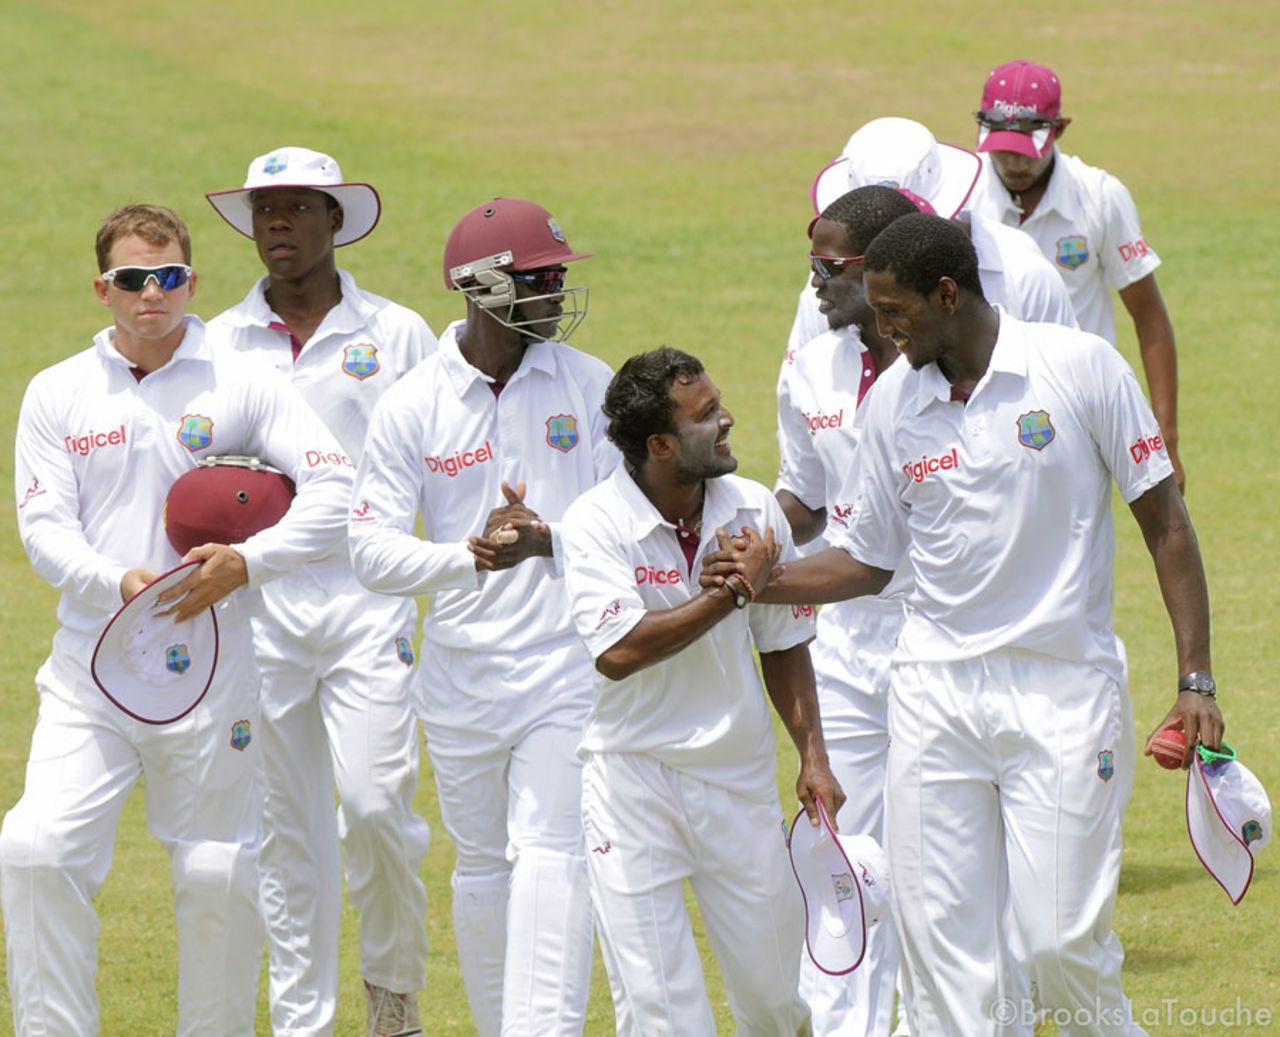 Veerasammy Permaul and Delorn Johnson shared all ten wickets, West Indies A v India A, 2nd unofficial Test, St Vincent, 4th day, June 12, 2012